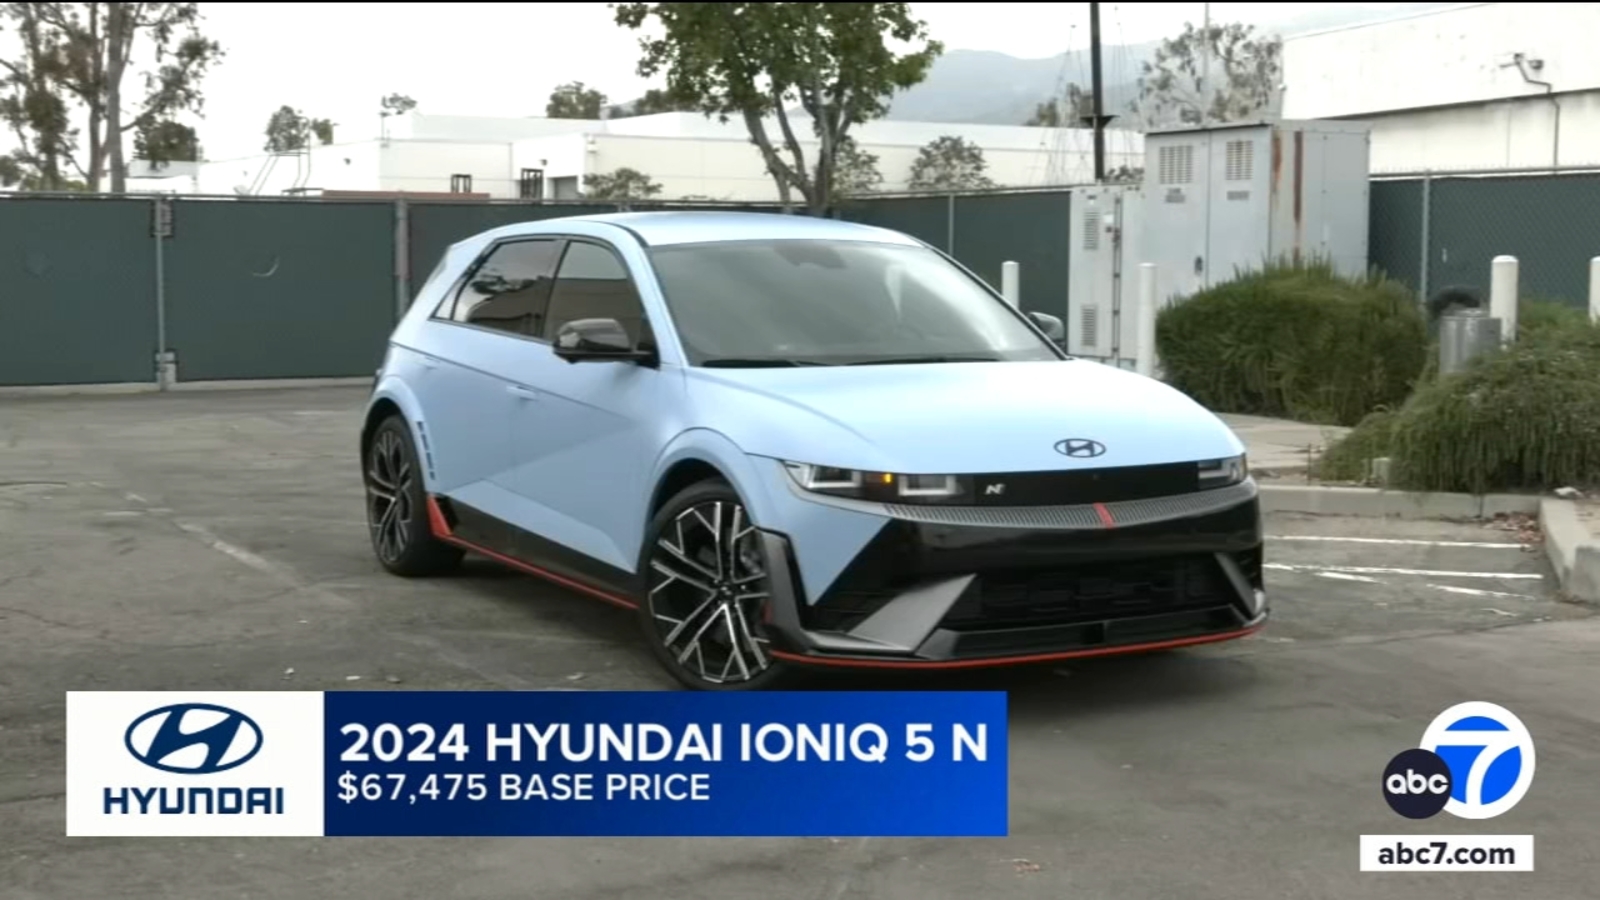 Hyundai N models, including Elantra N and Ioniq 5 N, are part of automaker’s new high-performance sub-brand [Video]